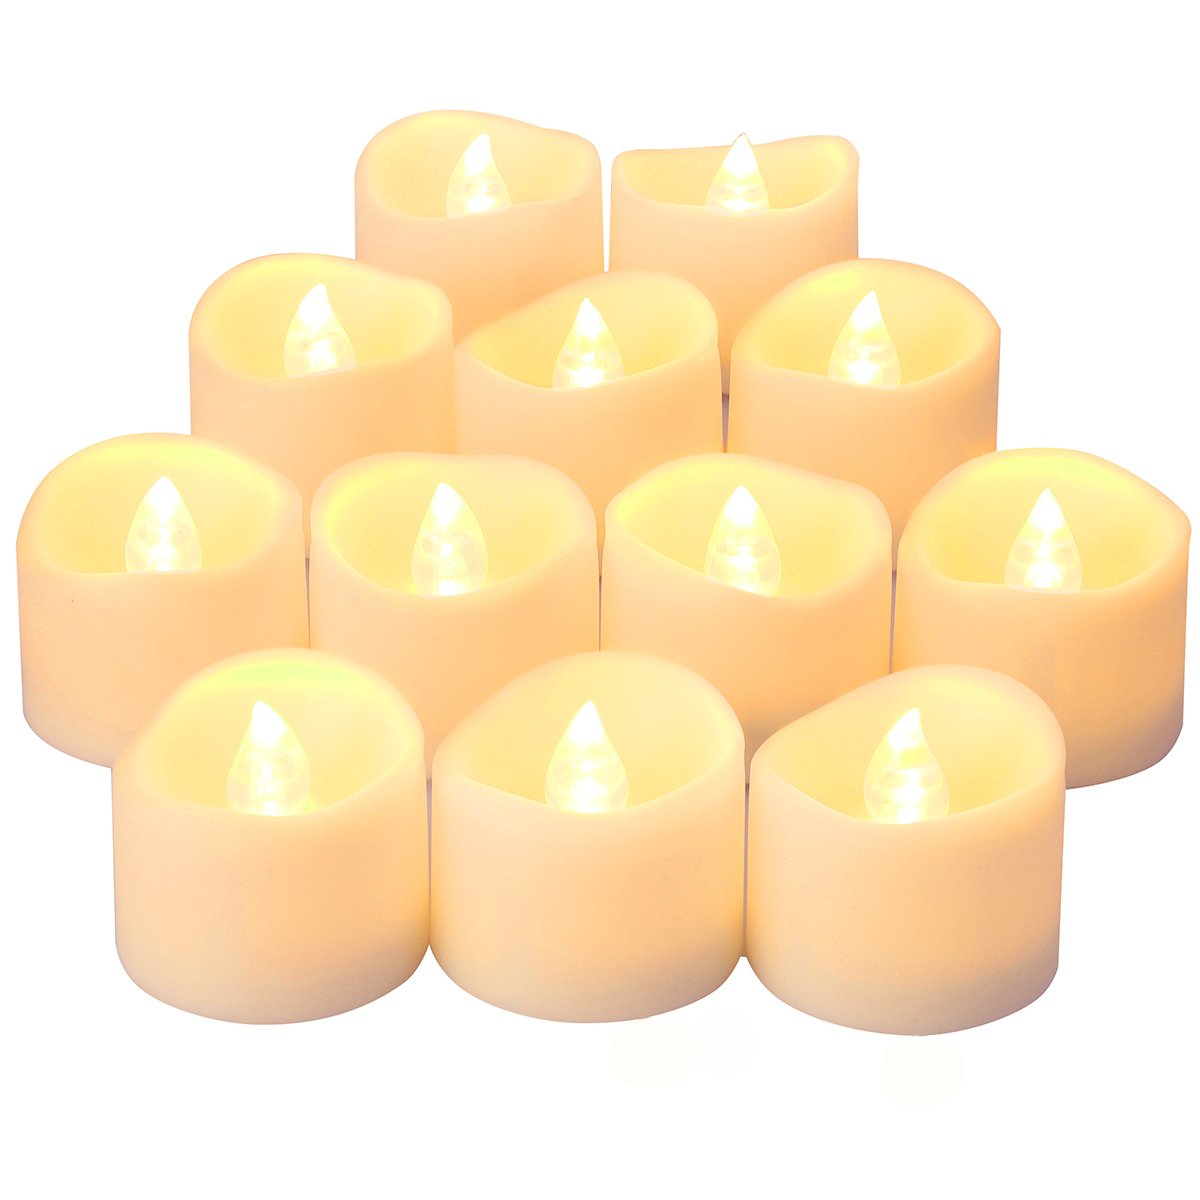 Oria LED Candles Tea Lights, Flickering Flameless Candles, Realistic Battery Operated Fake Candle with Warm White Bulb light for Christmas Decoration, Festivals, Weddings Propose etc. (Pack of 12)